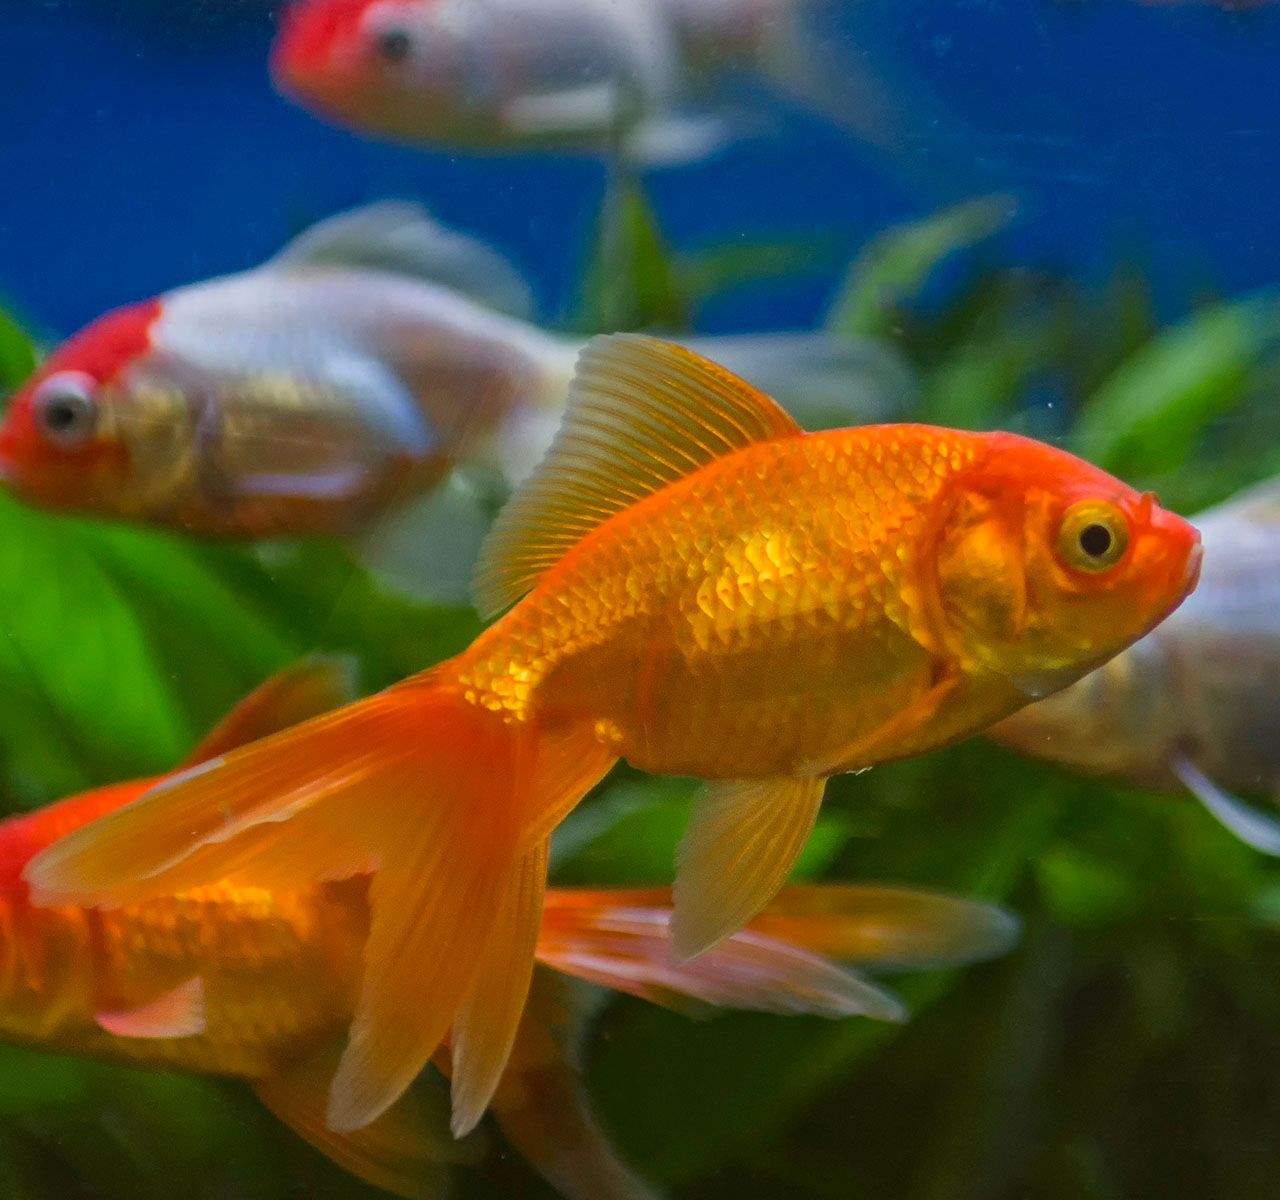 How to Take Care of Live Plants in Your Aquarium - PetHelpful